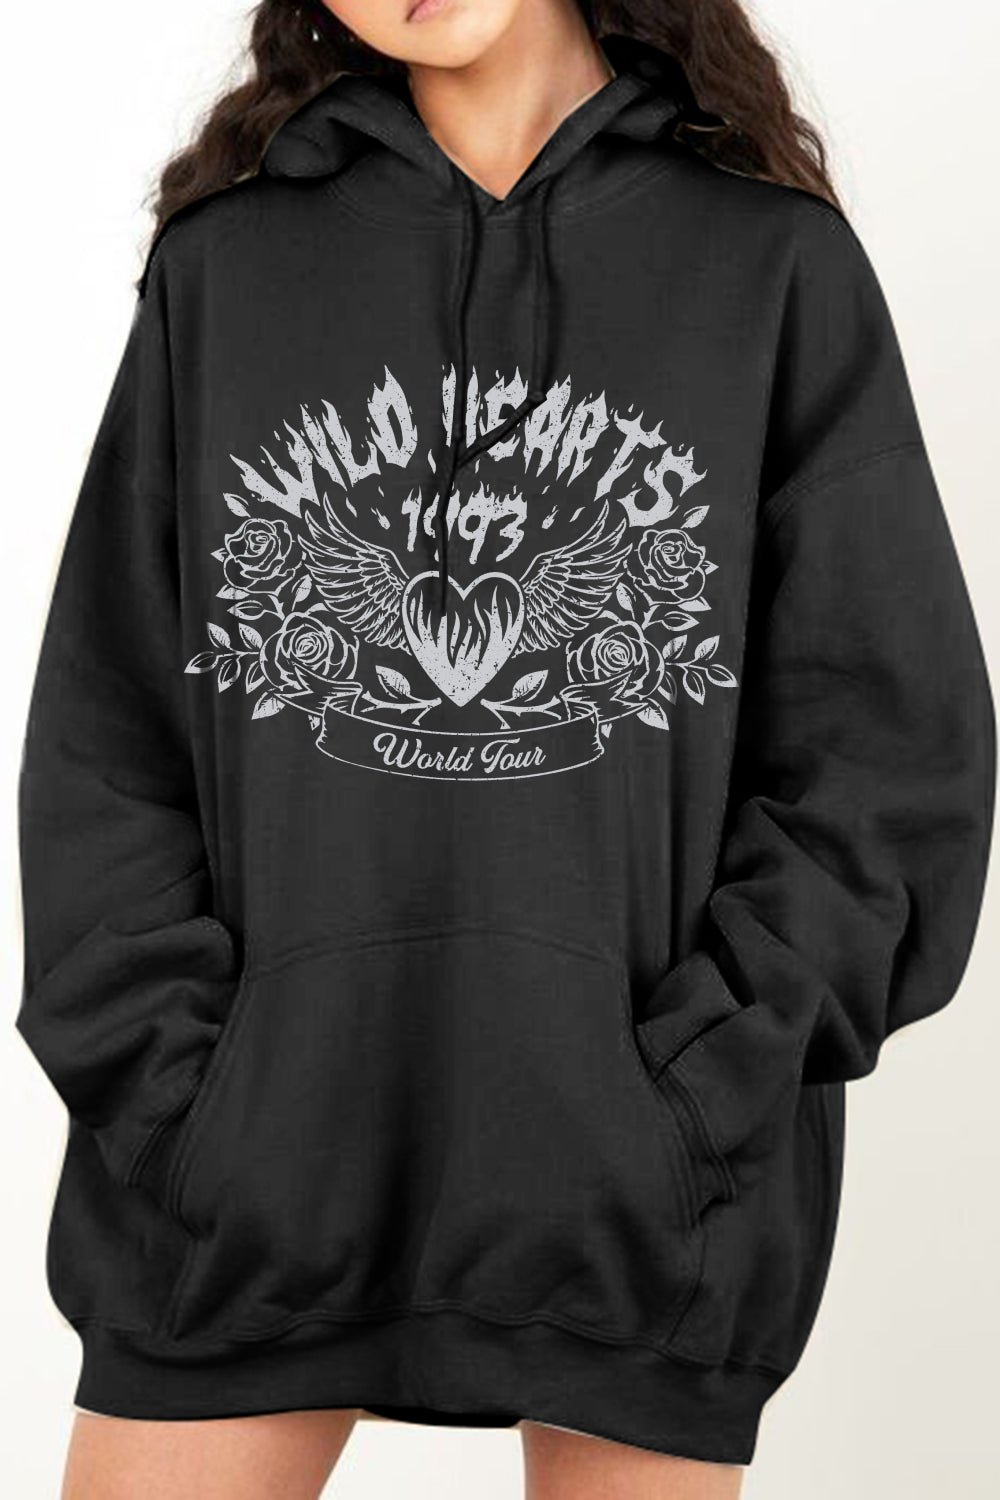 Trendsi Black / S Simply Love Full Size WILD HEARTS 1993 WORLD TOUR Graphic Hoodie